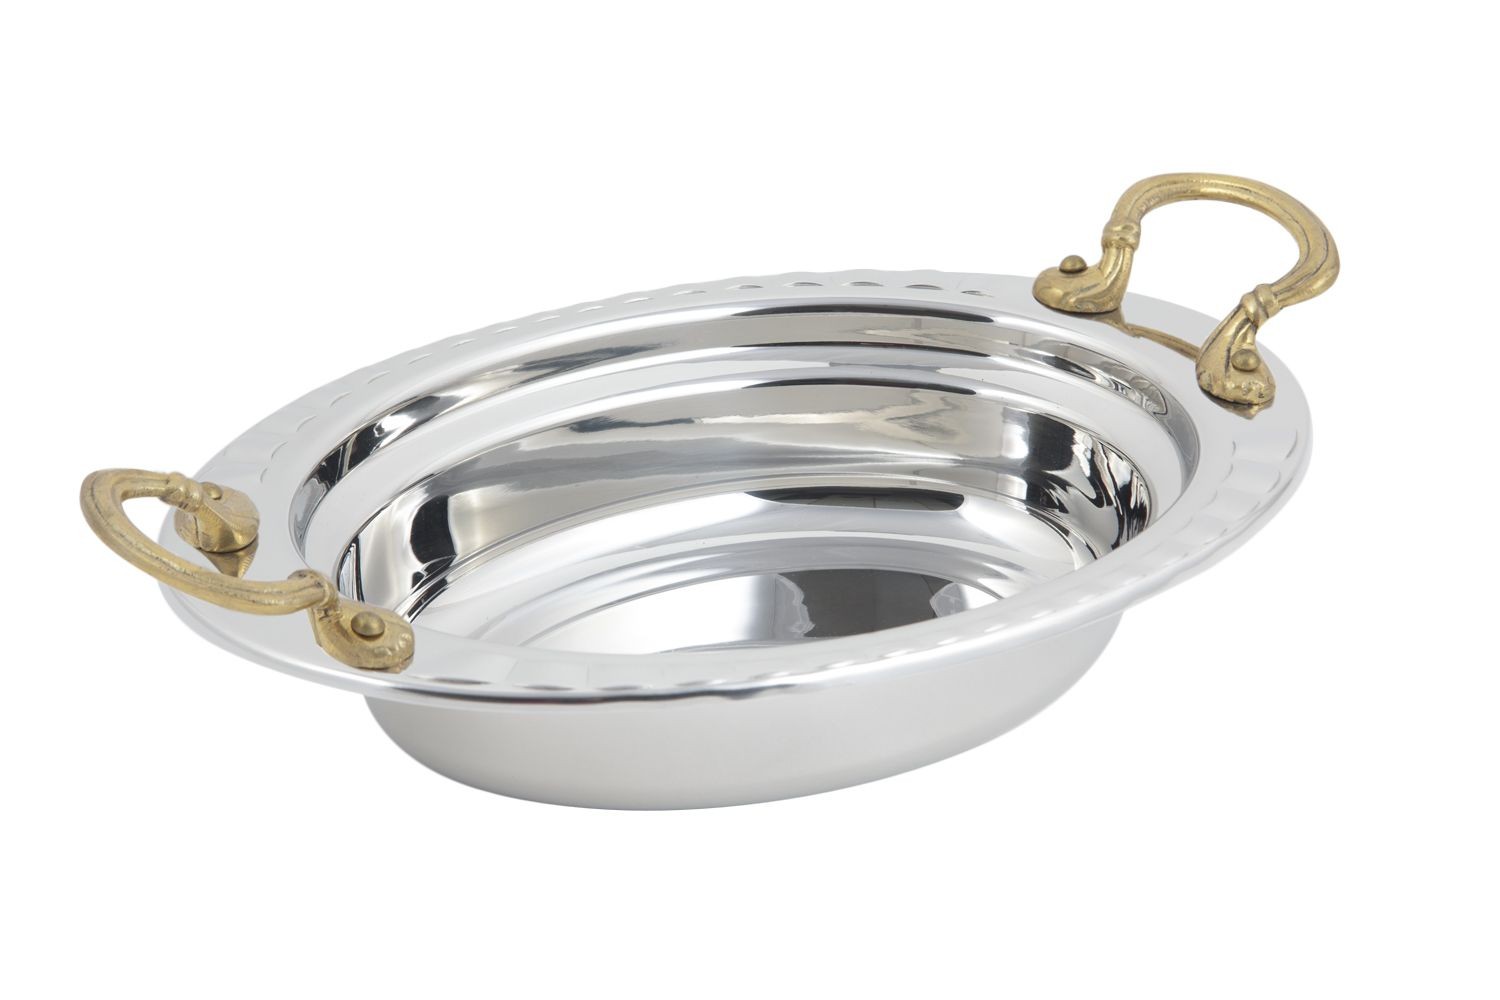 Bon Chef 5604HR Arches Design Oval Food Pan with Round Brass Handles, 2 Qt.